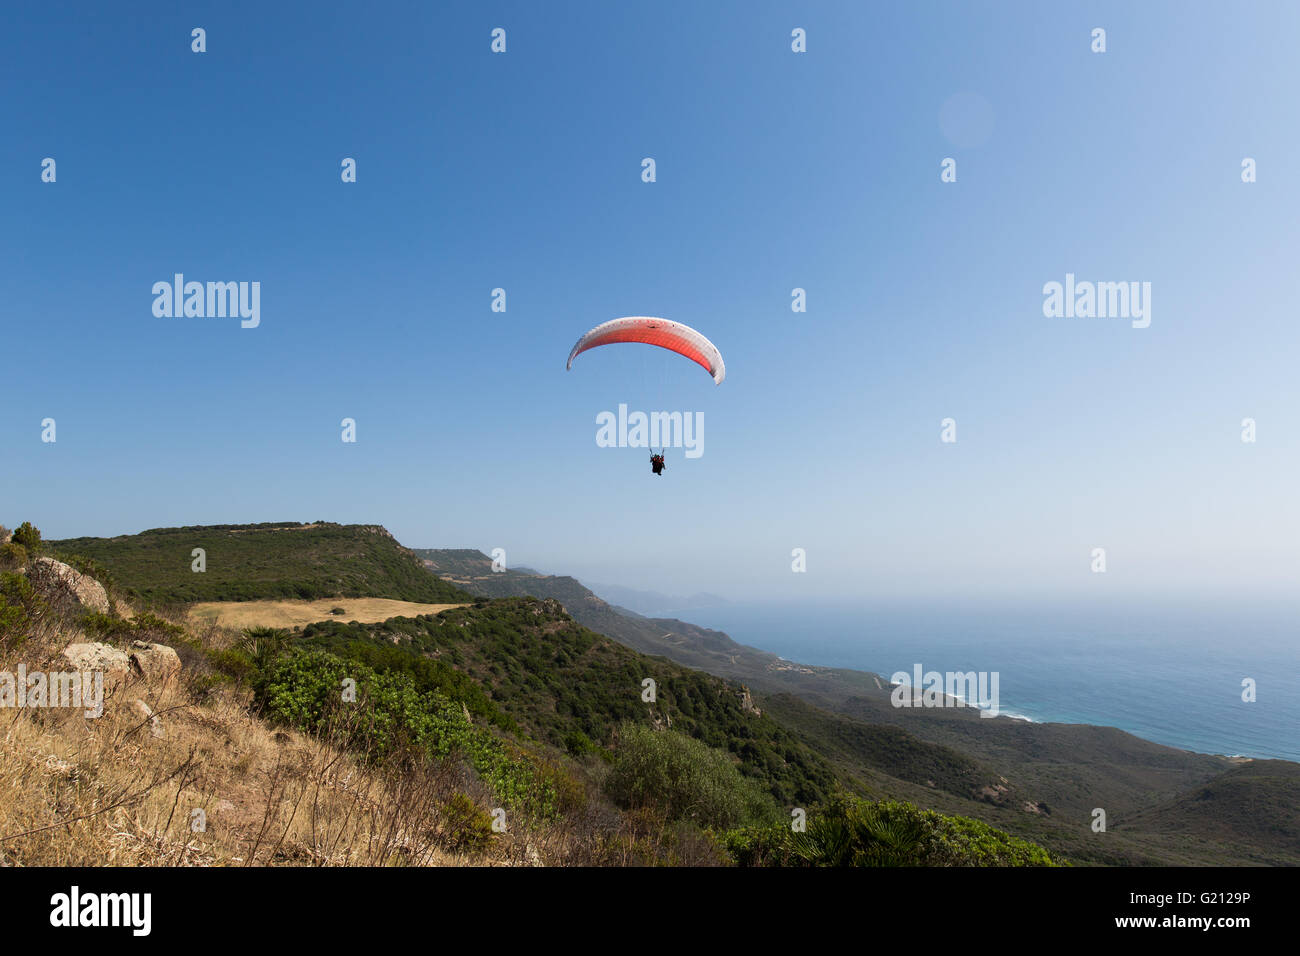 Paragliding over mountains in Italy Stock Photo